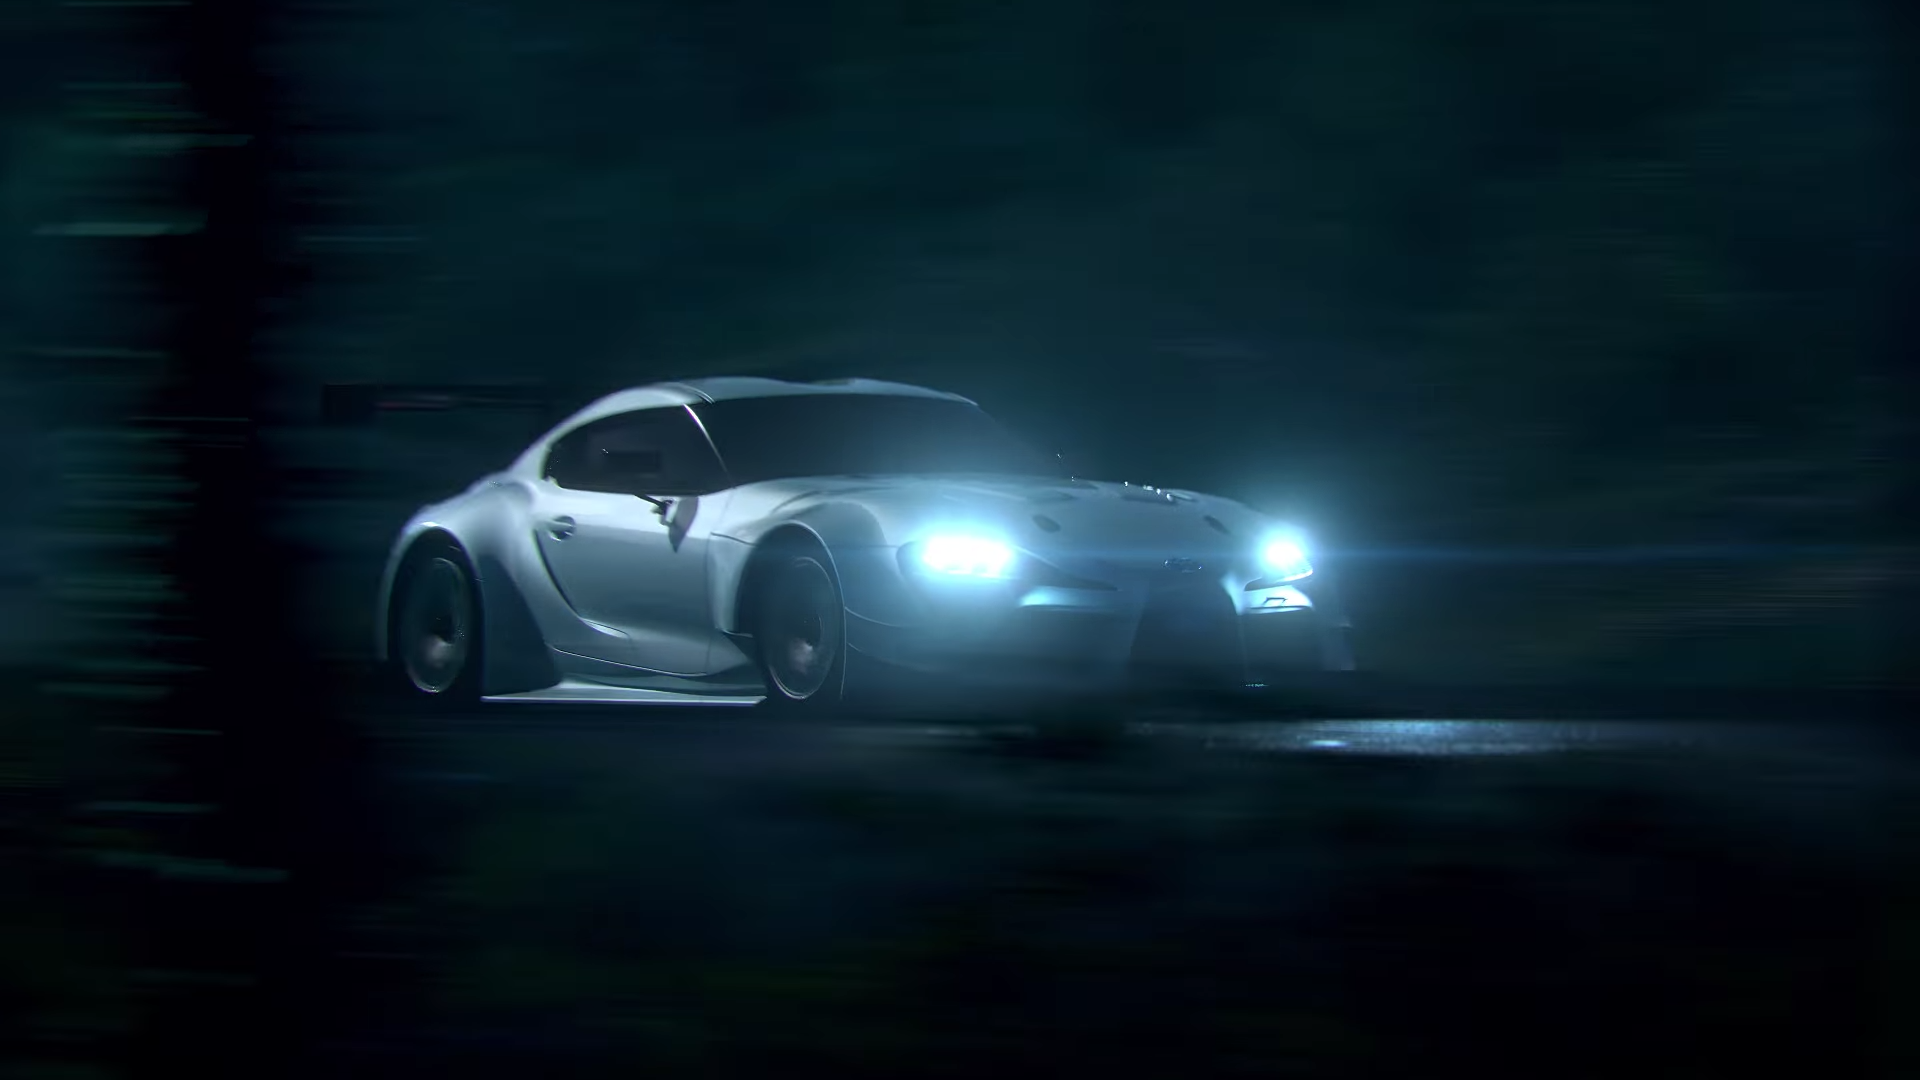 Watch The Toyota Supra Get The Initial D Treatment